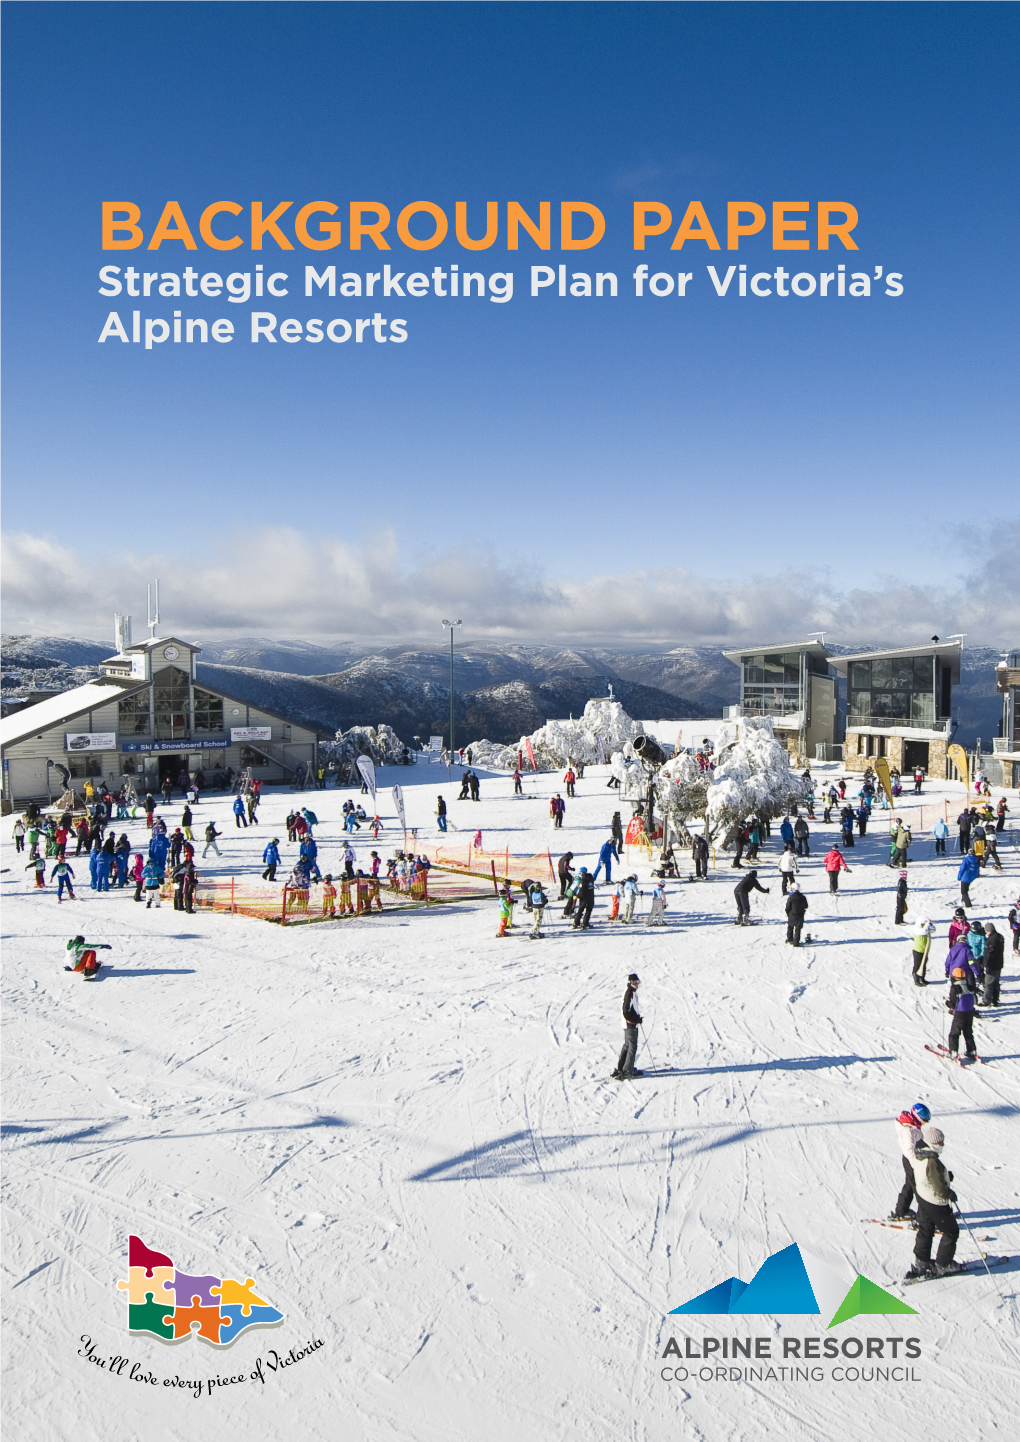 BACKGROUND PAPER Strategic Marketing Plan for Victoria’S Alpine Resorts Published by Tourism Victoria and the Alpine Resorts Co- Ordinating Council, July 2013